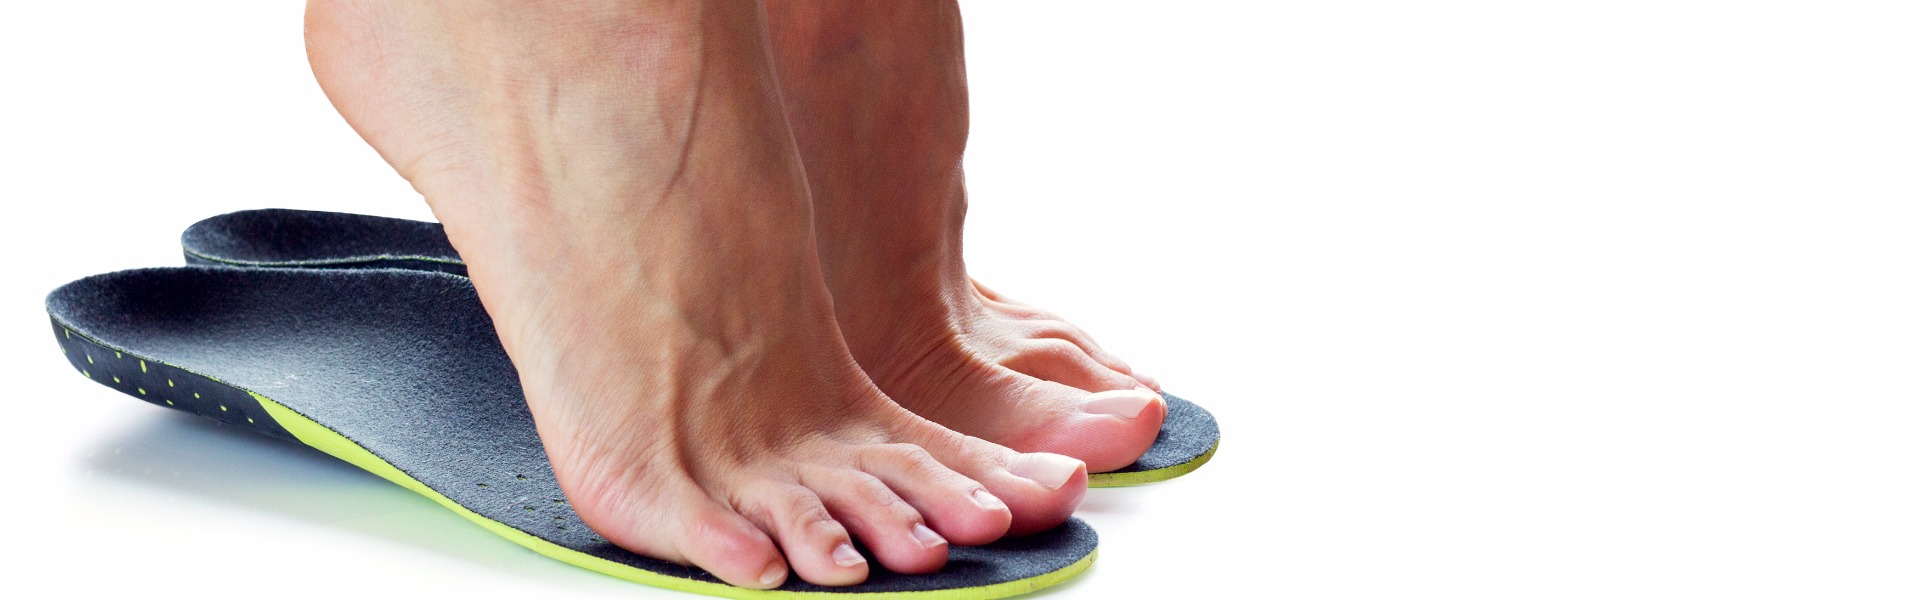 Common Signs You Need Orthotics | Mercy 